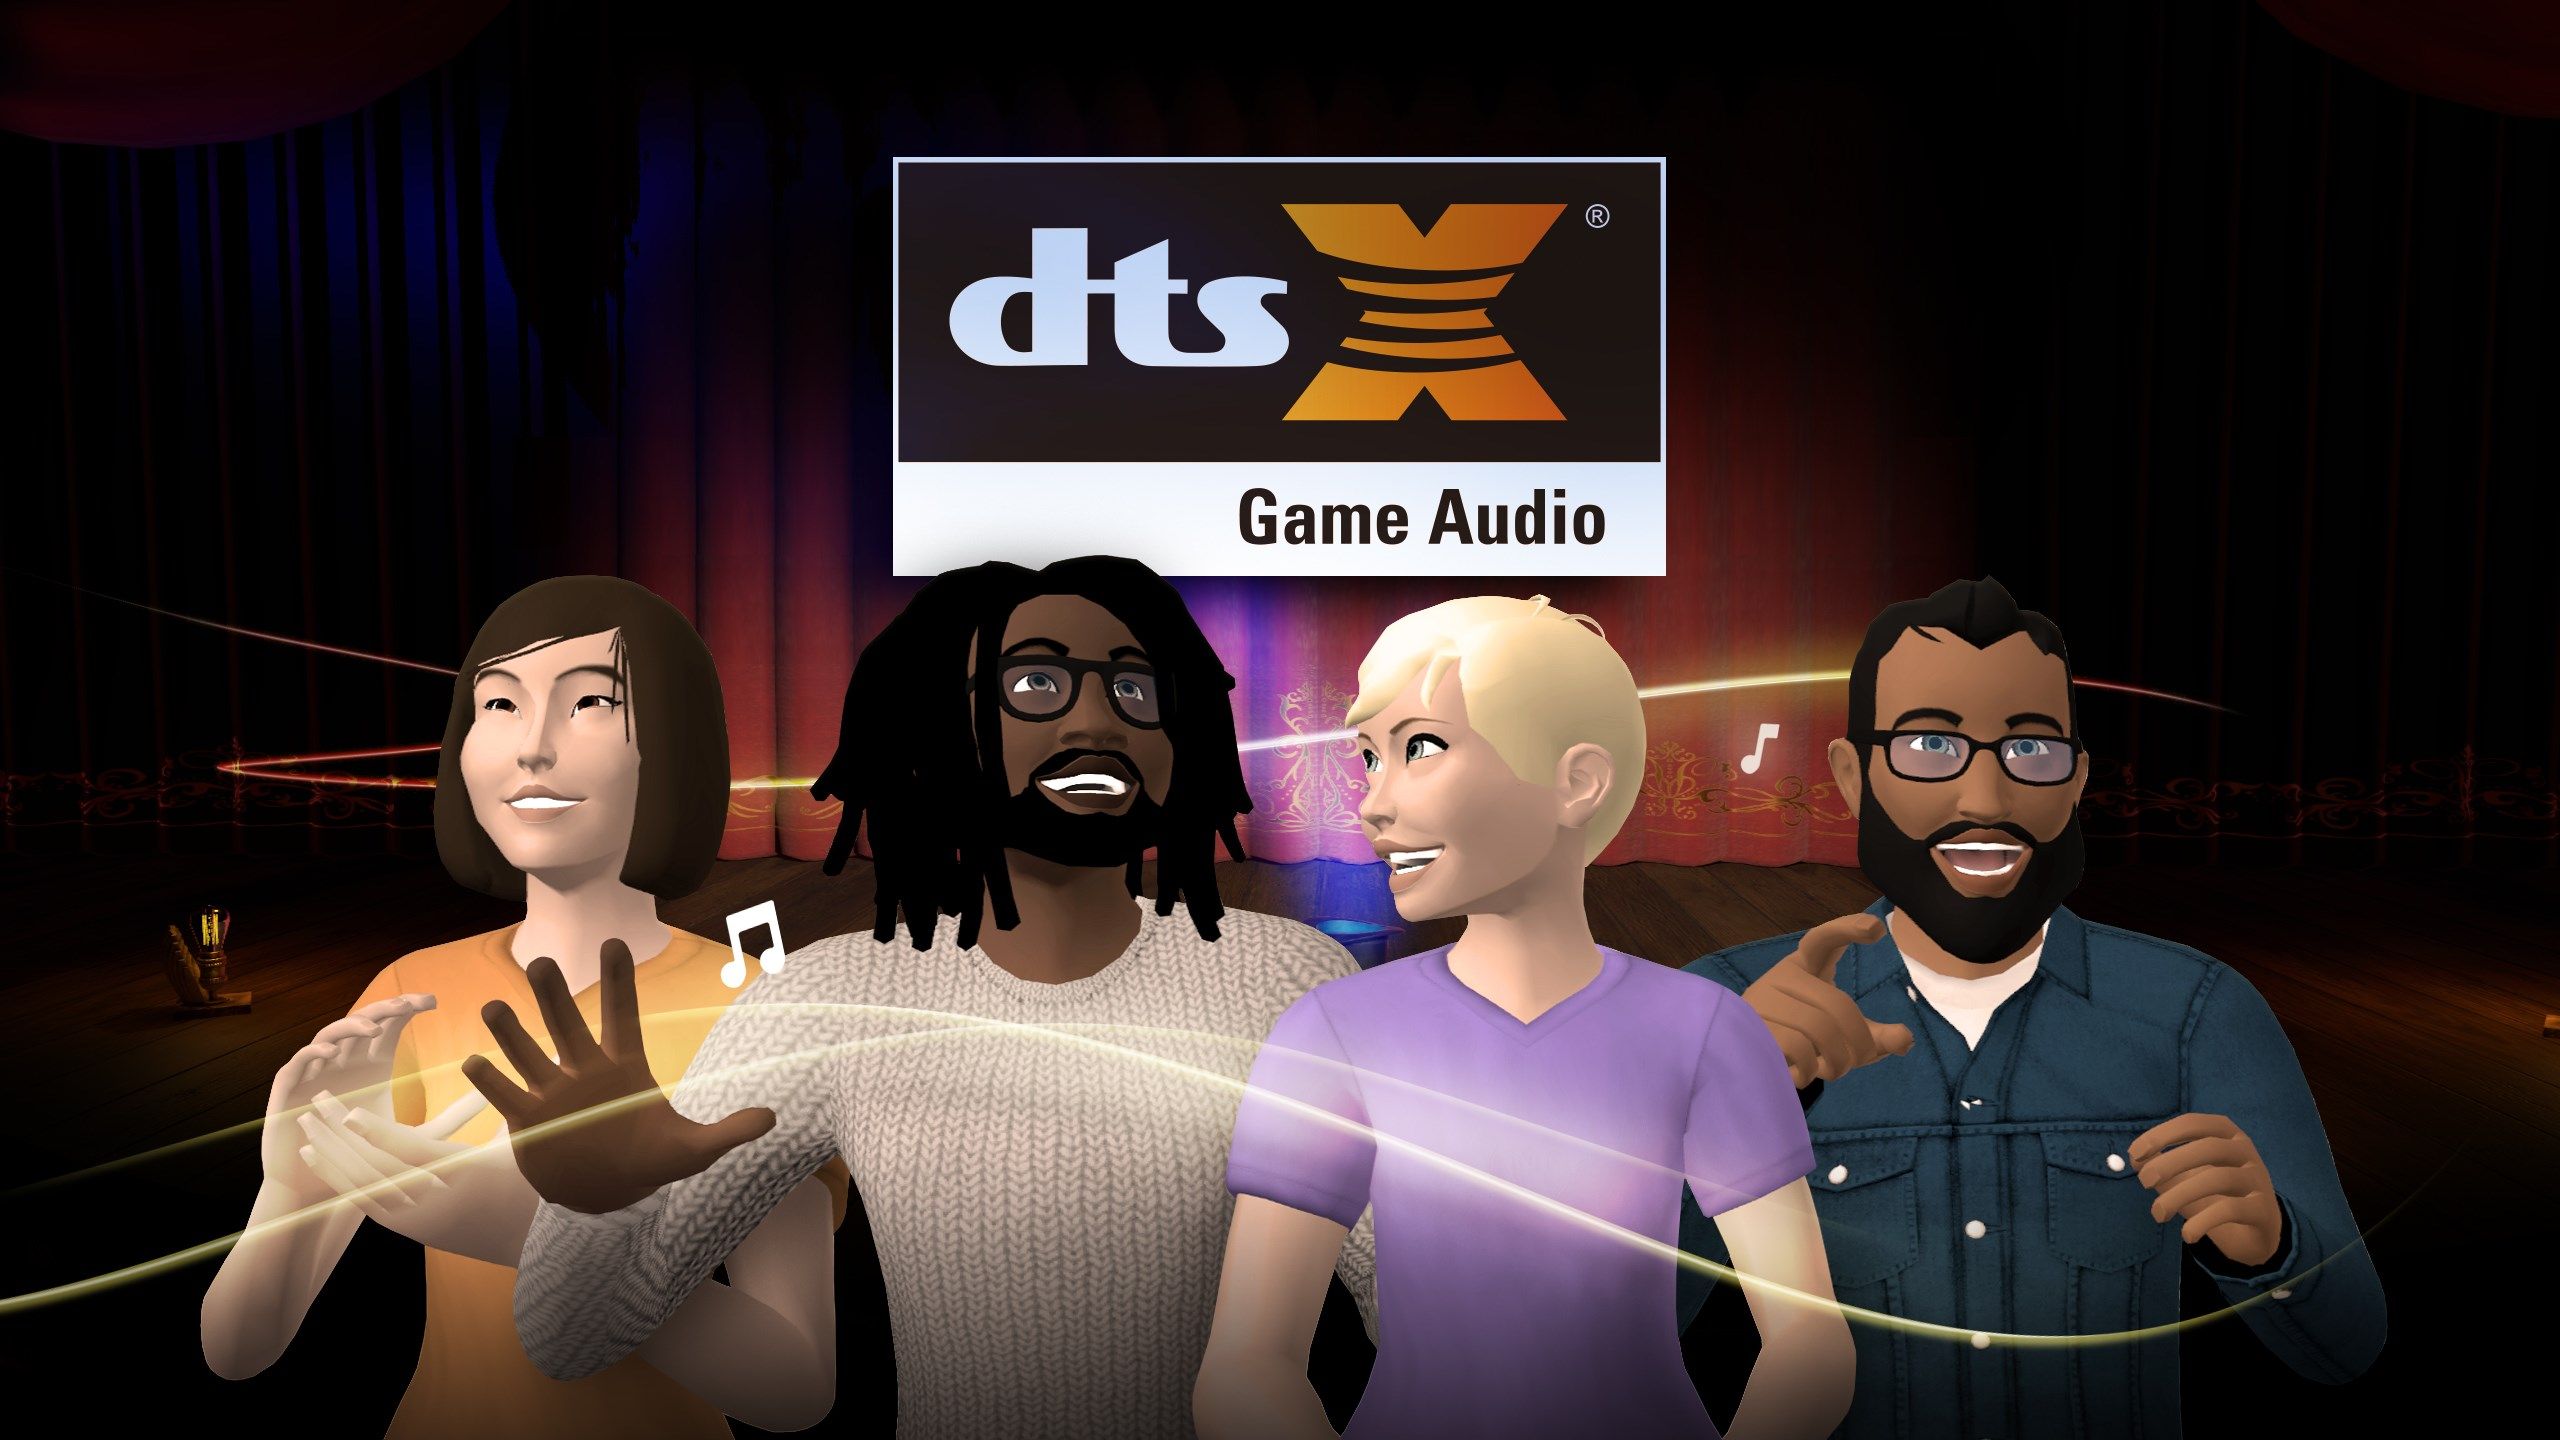 Experience lifelike 360 sound with DTS:X® Game Audio